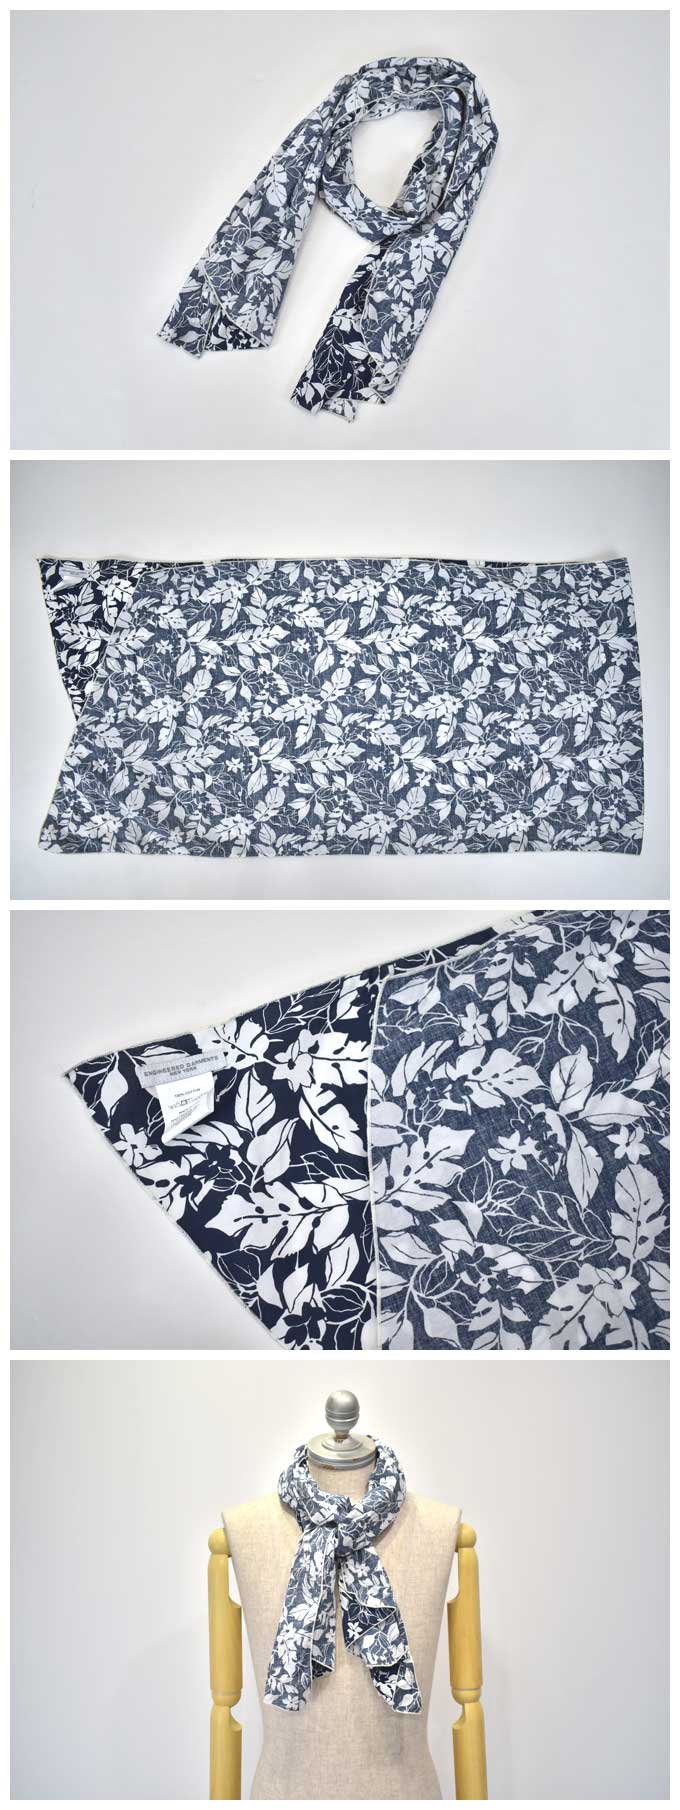 Long Scarf (Floral Printed Lawn) / Nvy/Wht